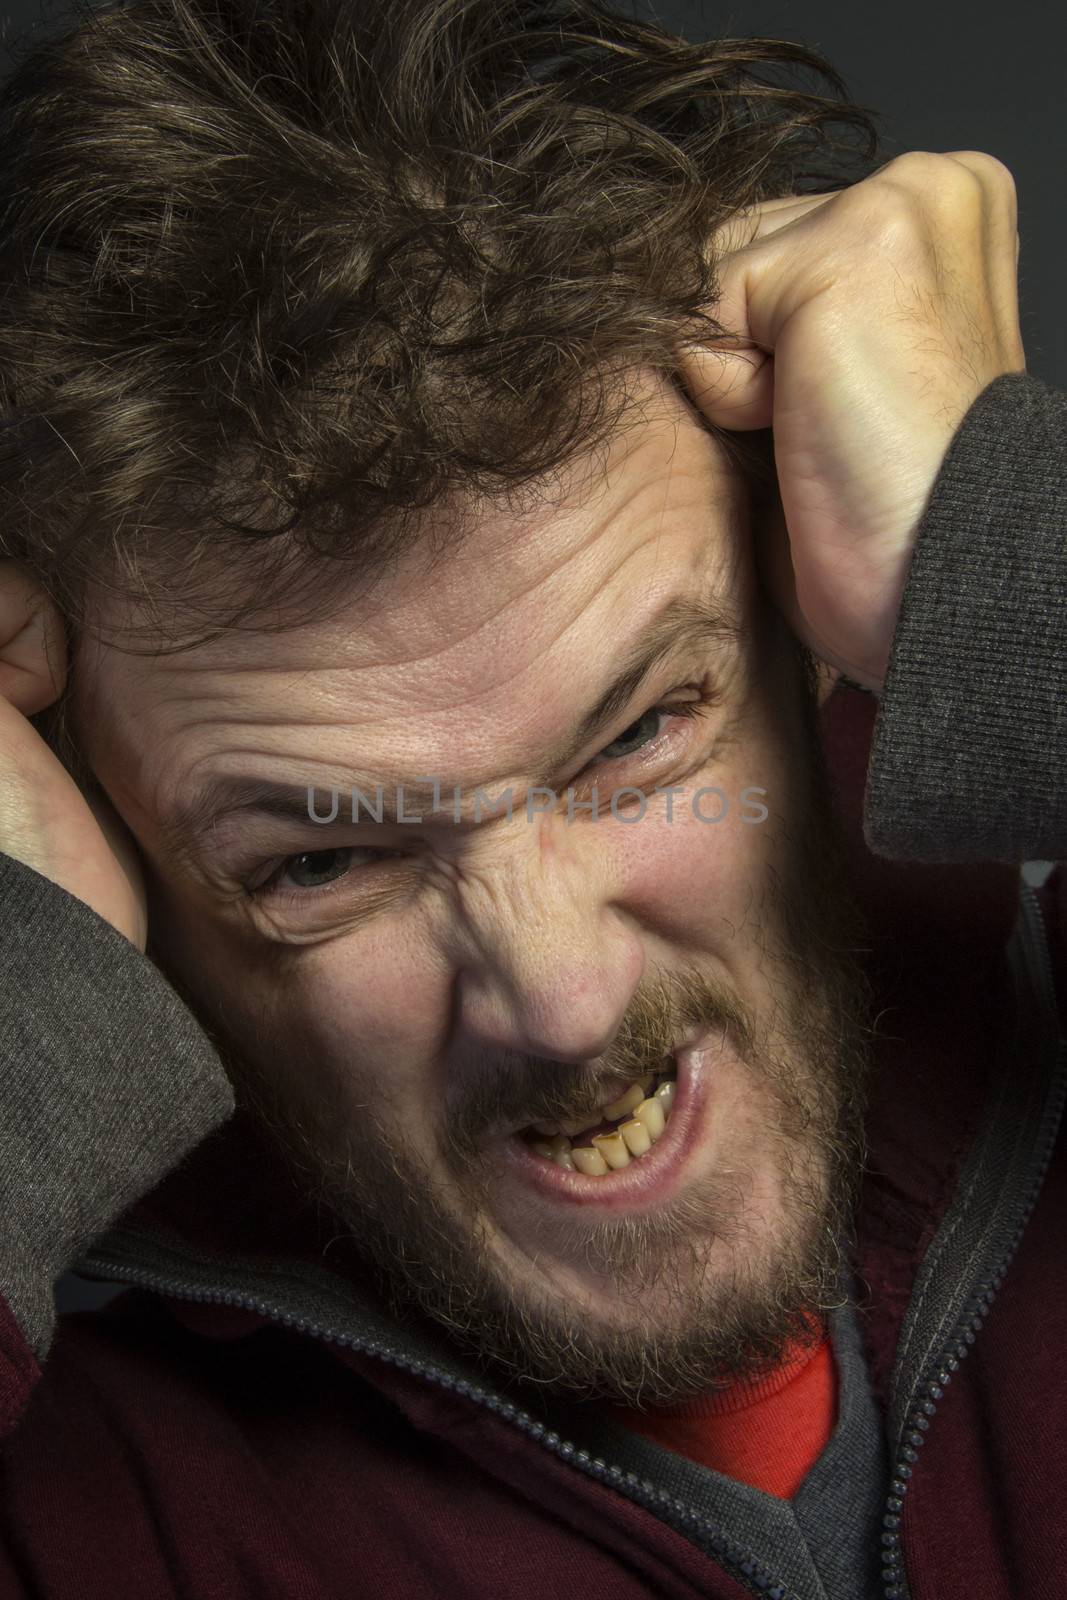 An angry man with a bad temper tearing his hair out.